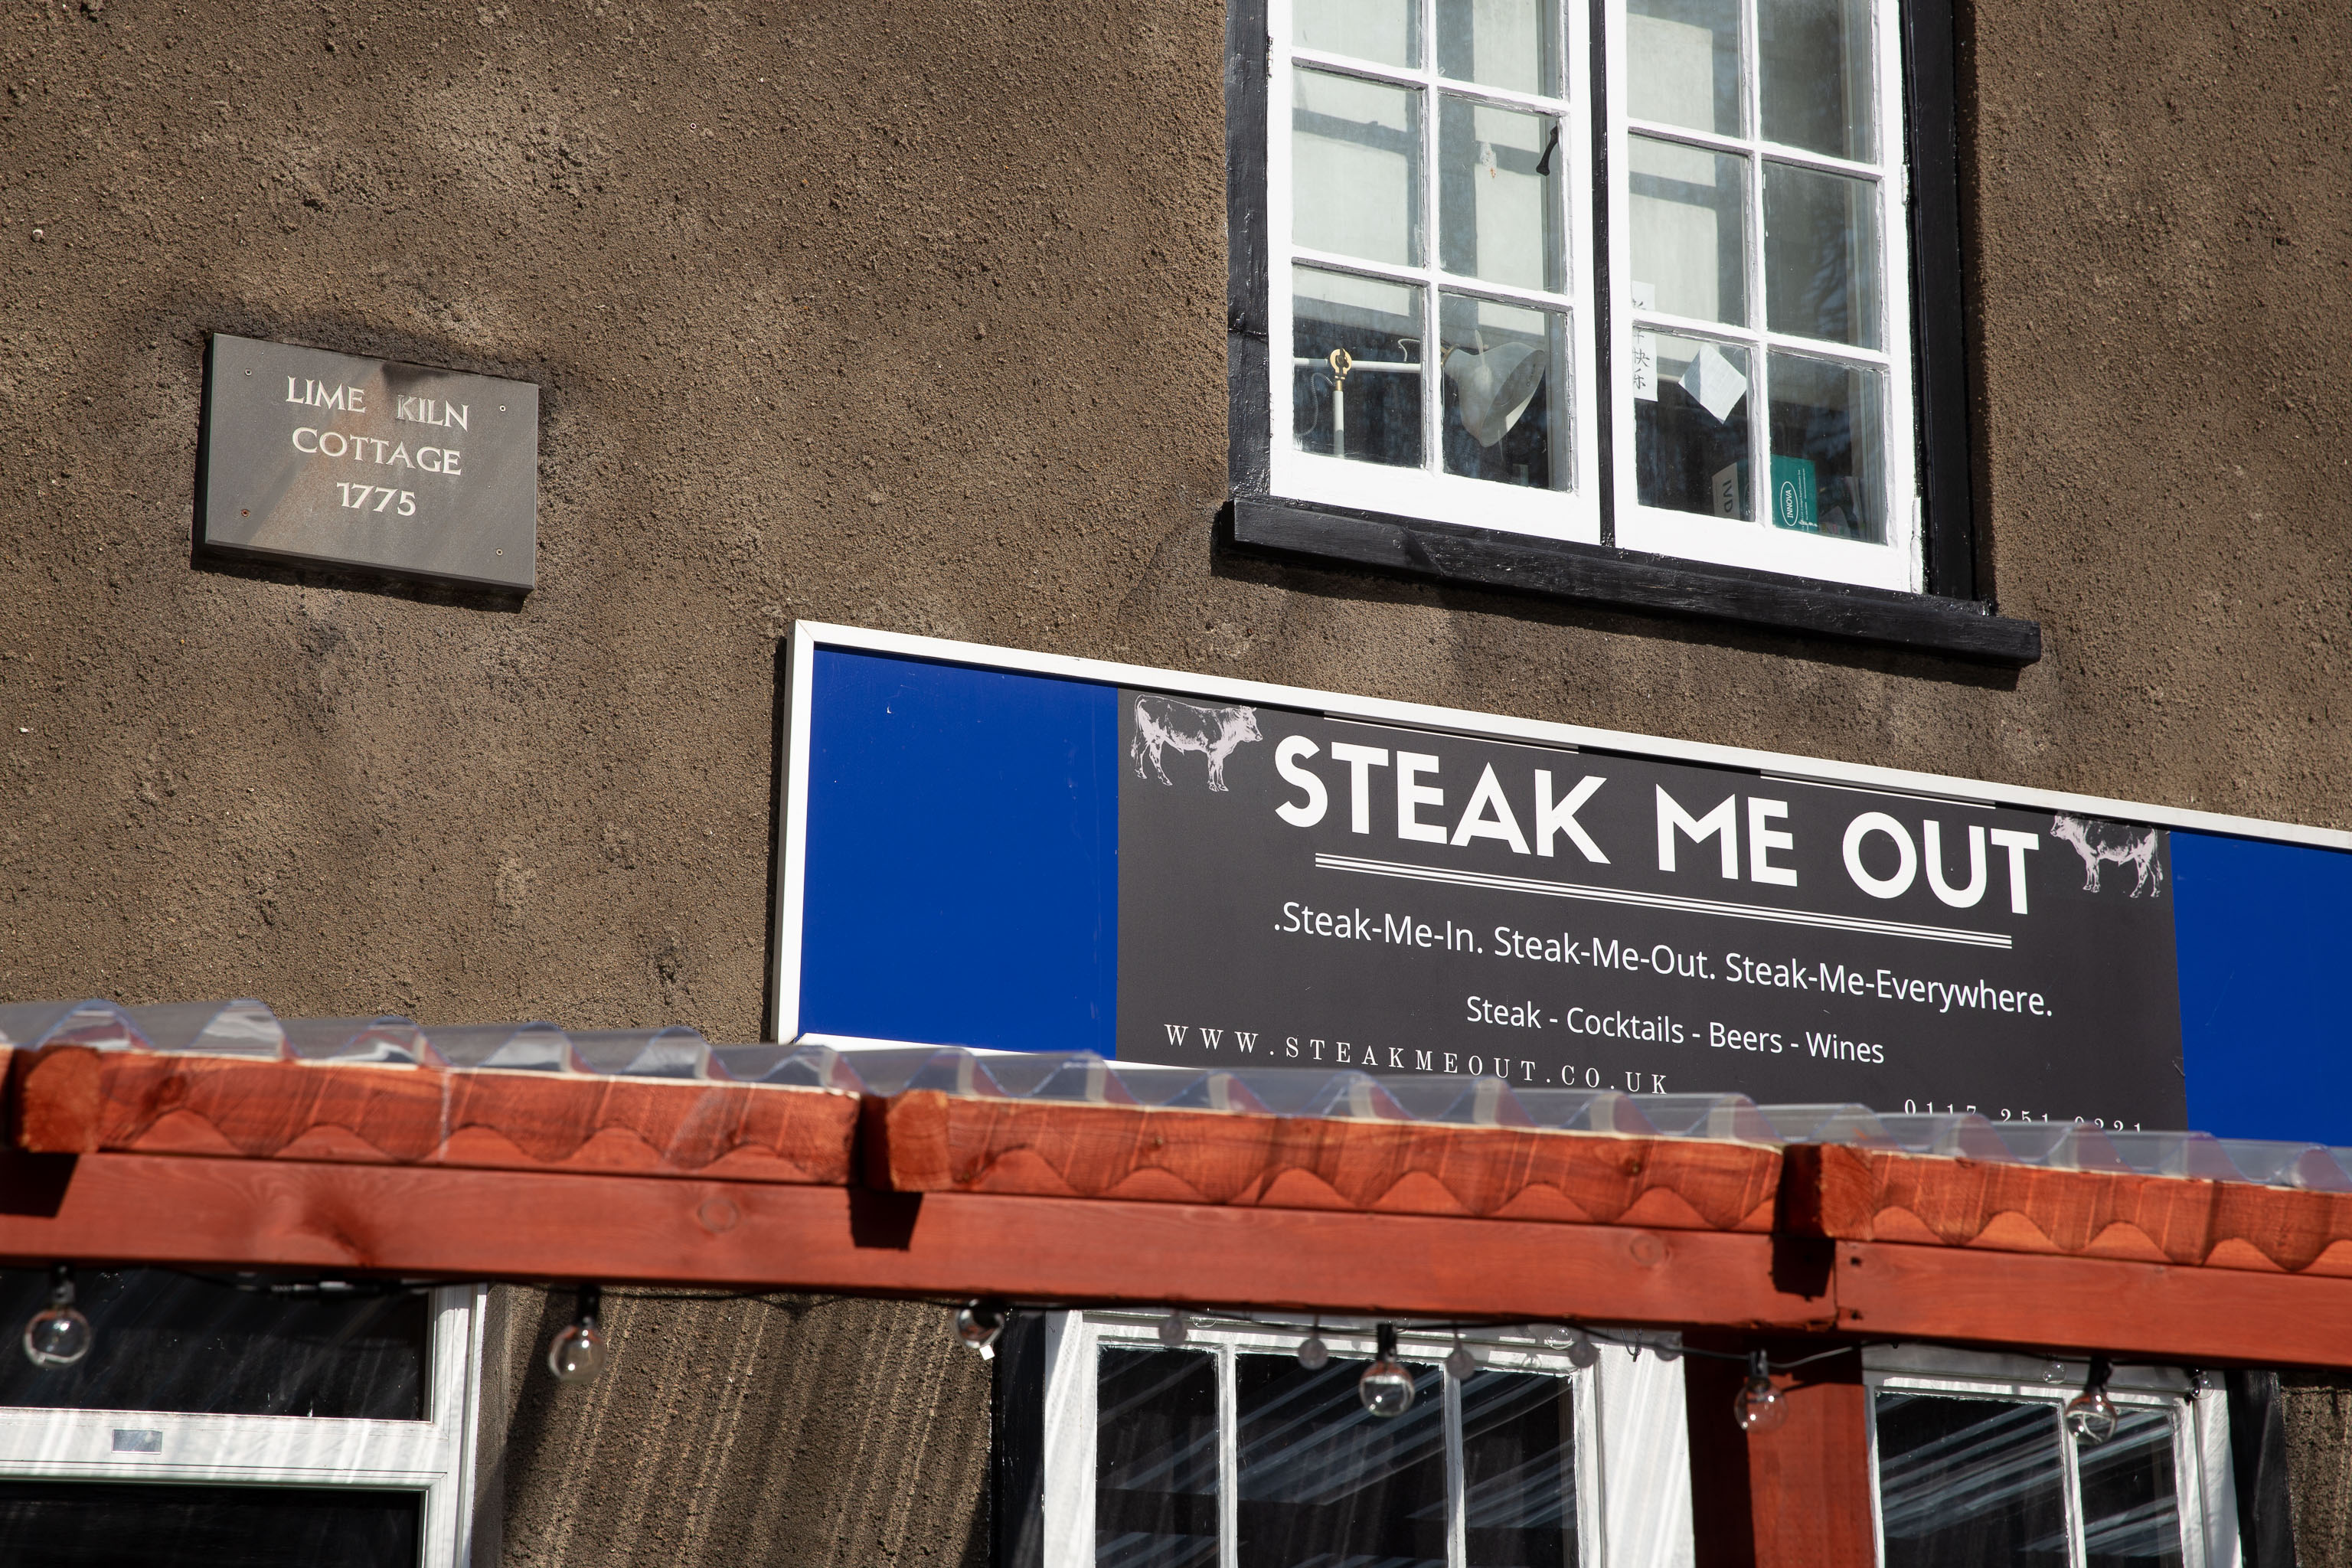 Steak Me Out
So, I guess they serve steak.
